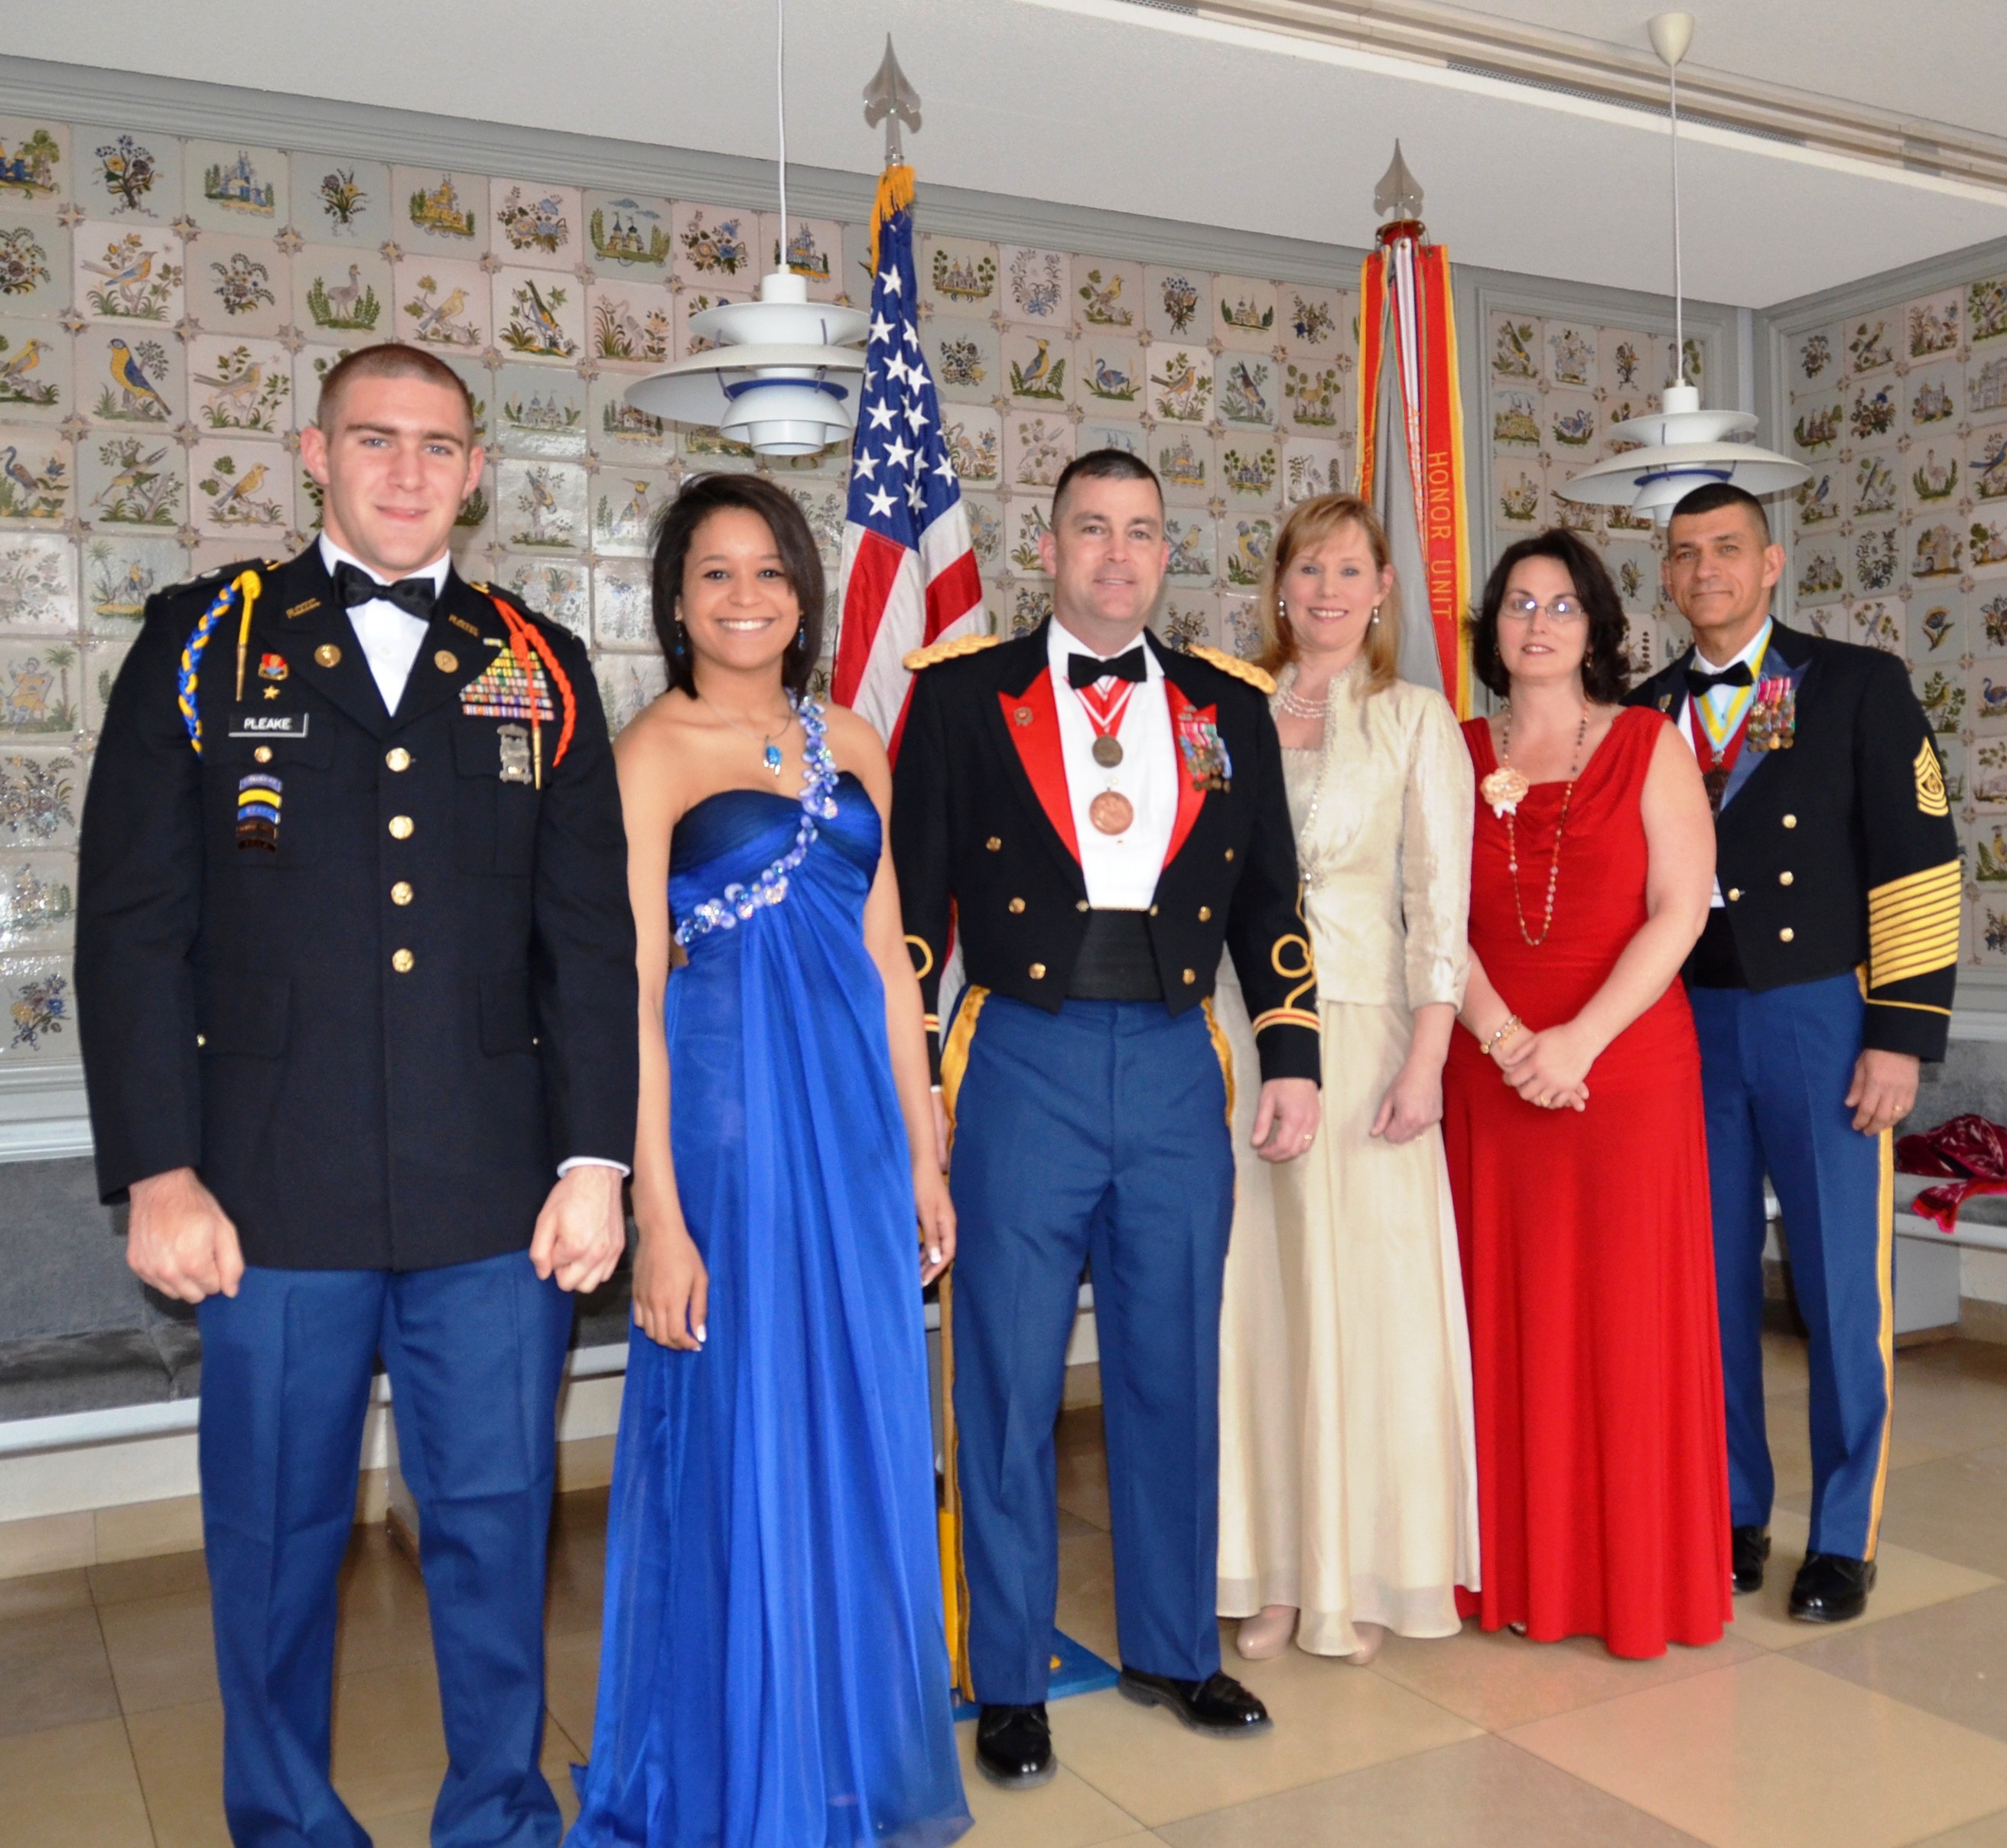 9th Battalion of JROTC celebrates 30th annual military ball in Ansbach